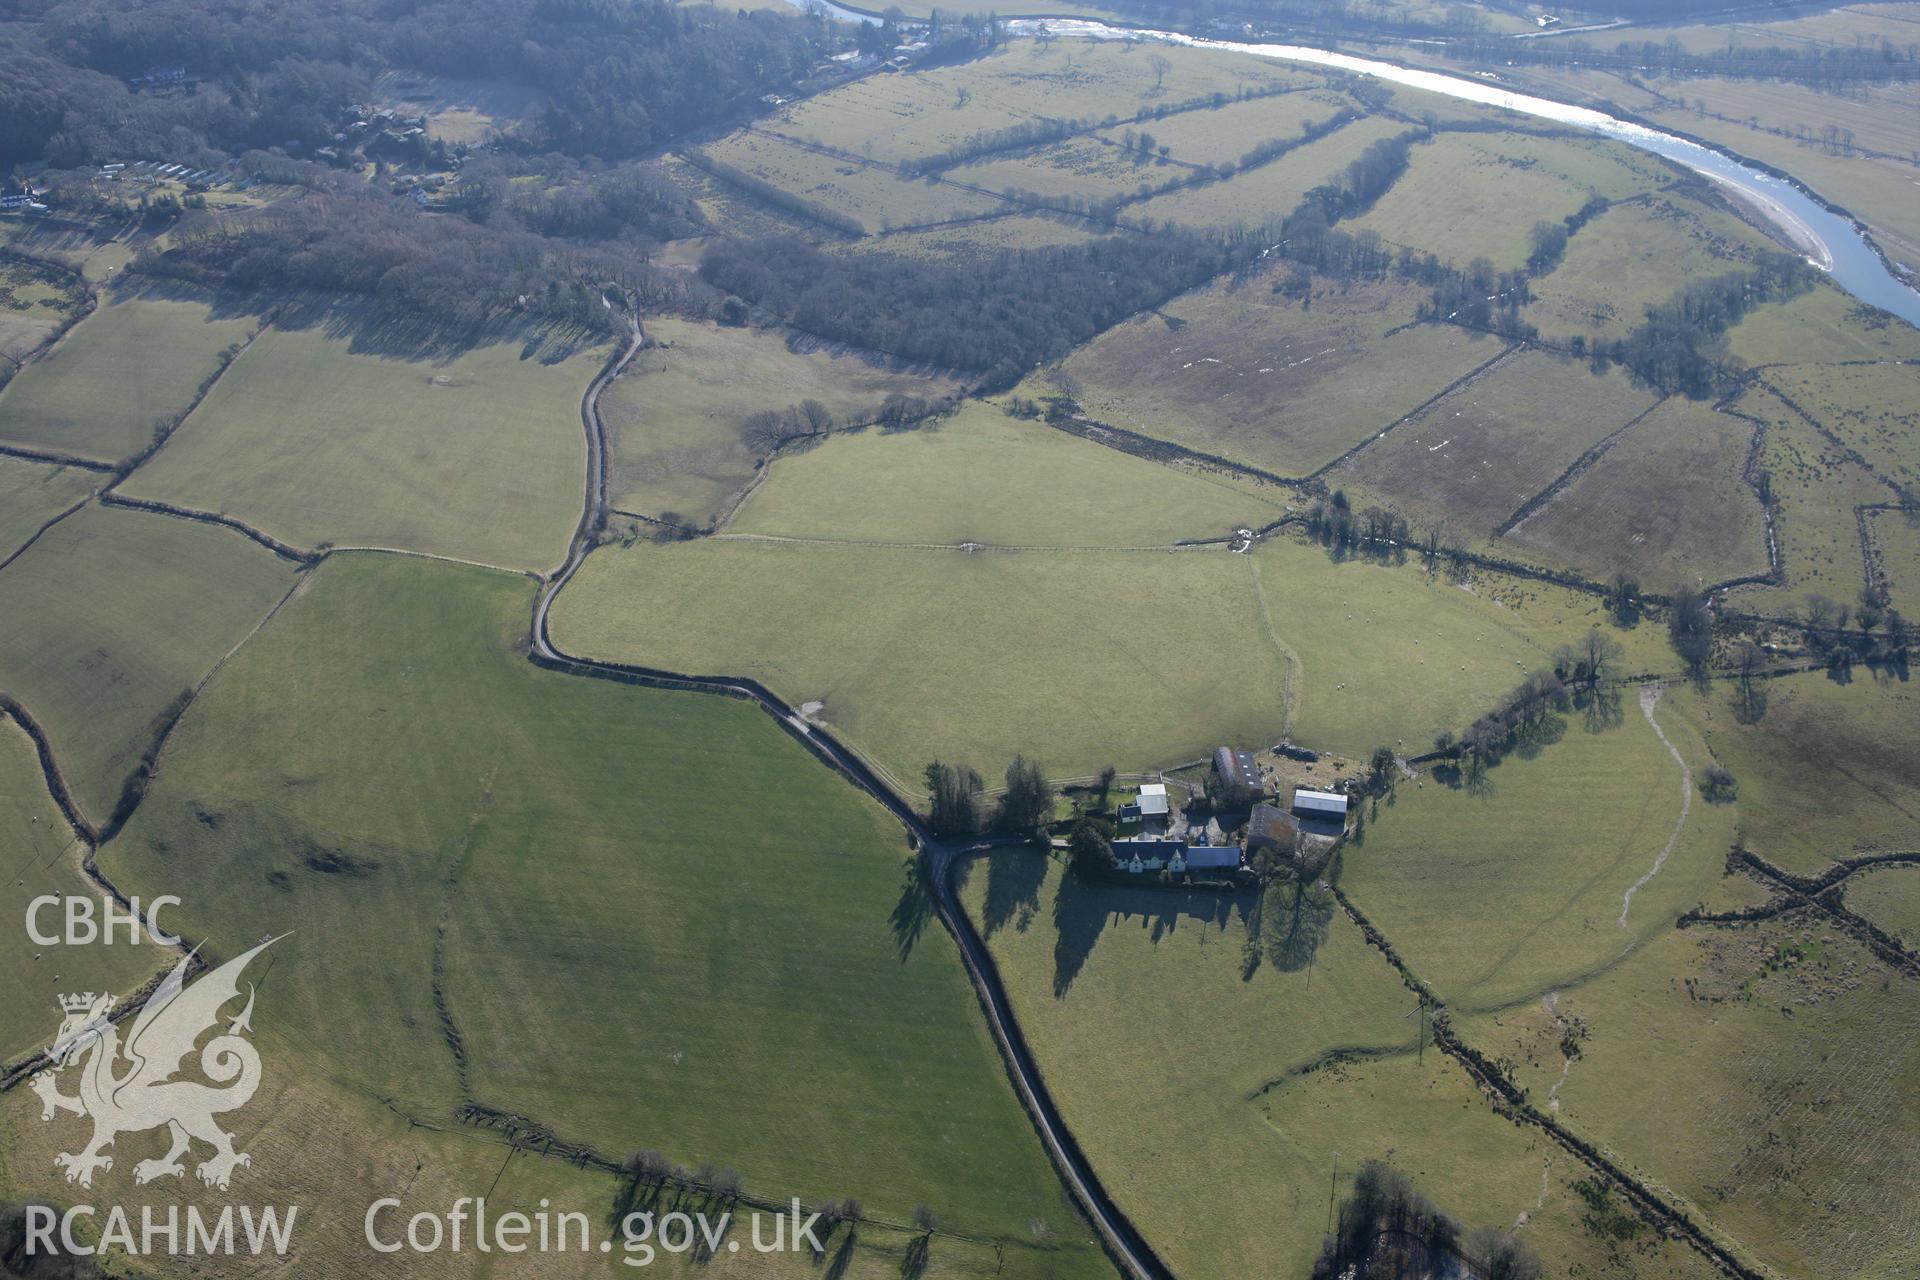 RCAHMW colour oblique photograph of Cefn Caer Roman Fort. Taken by Toby Driver on 08/03/2010.